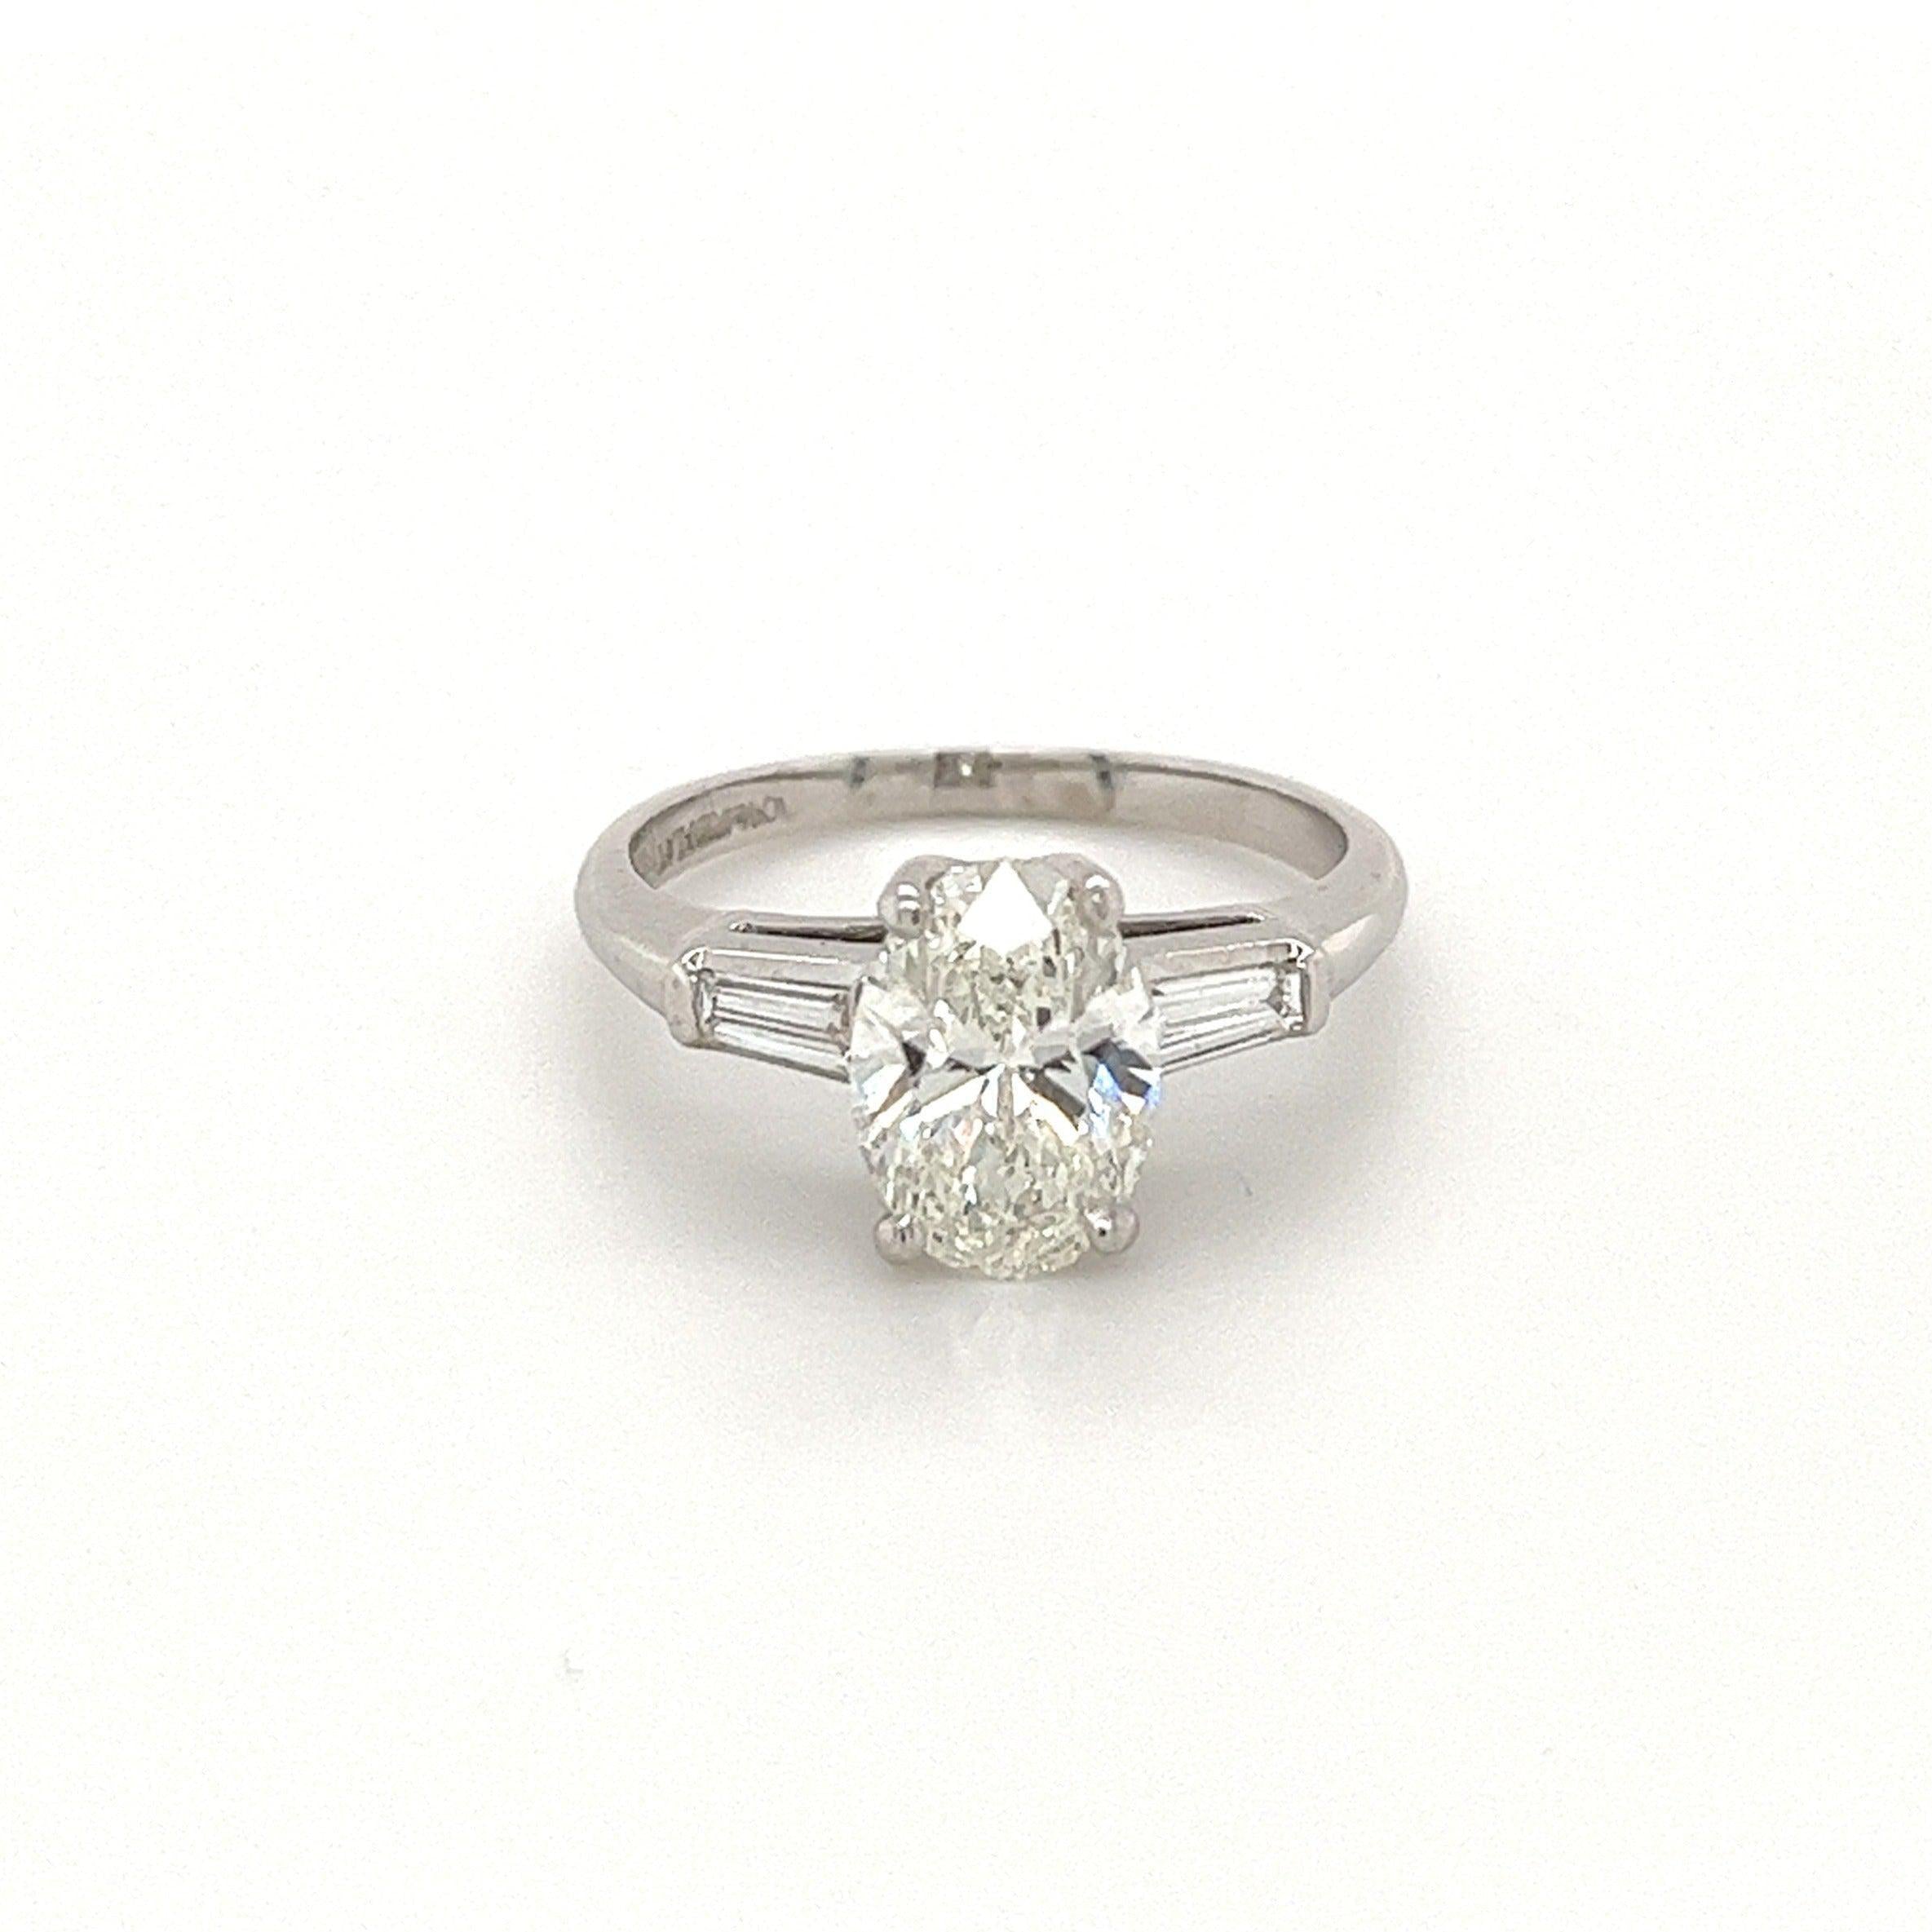 1.68 Carat Oval Cut Lab Grown Diamond in Platinum Ring With Baguette Side Stones-Rings-ASSAY